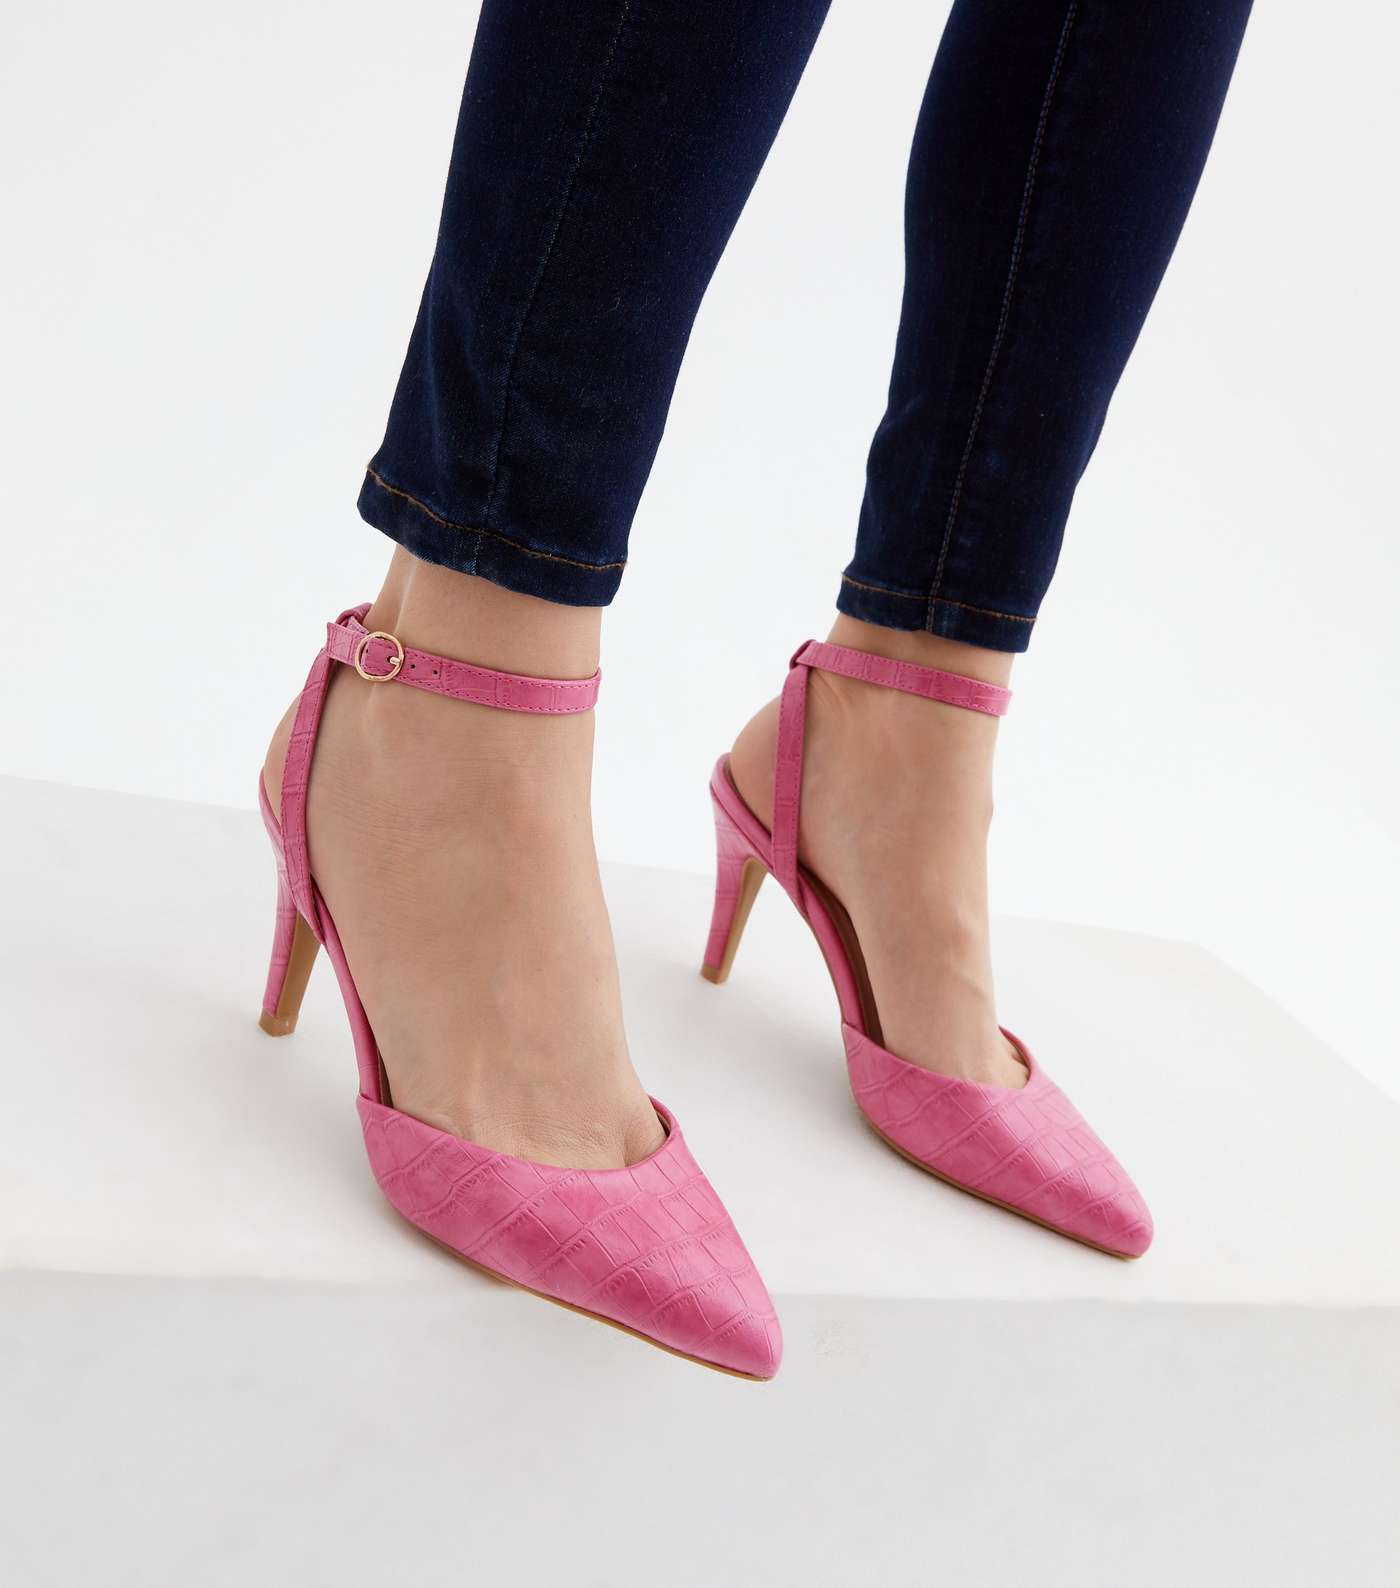 Wide Fit Bright Pink Pointed Stiletto Heel Court Shoes Image 2